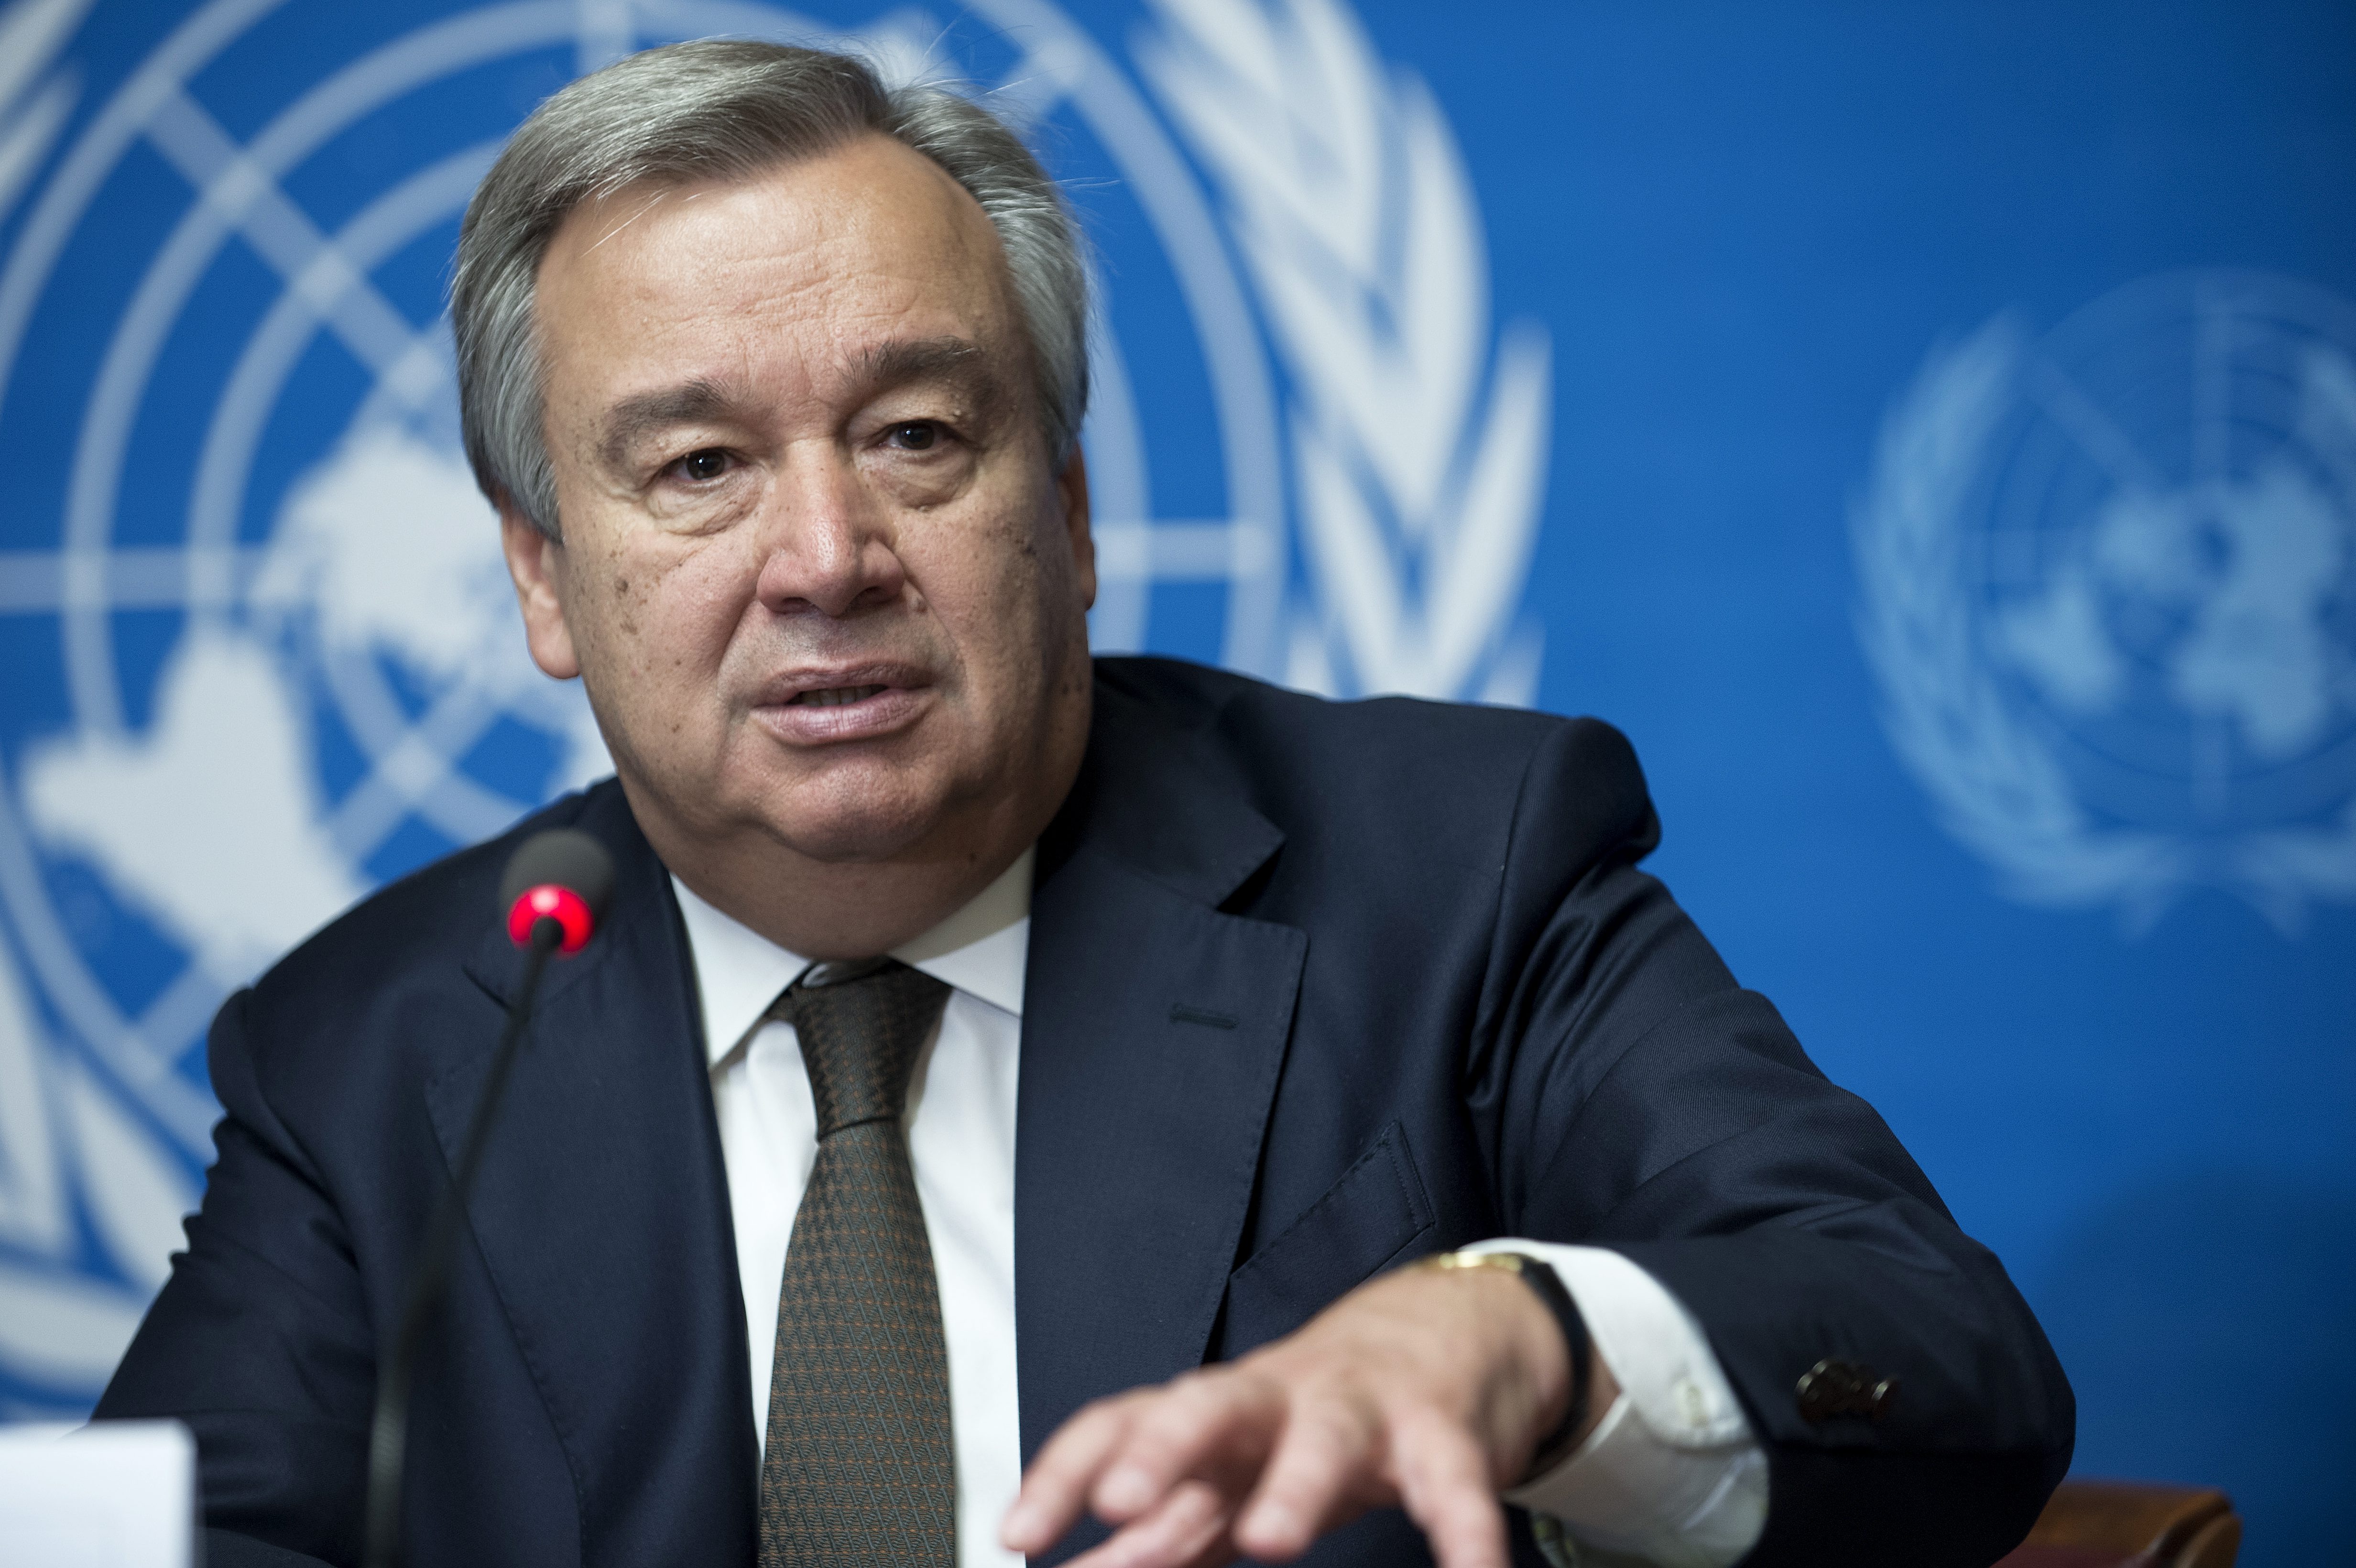 Iran has key role in Middle East region and globally; Guterres